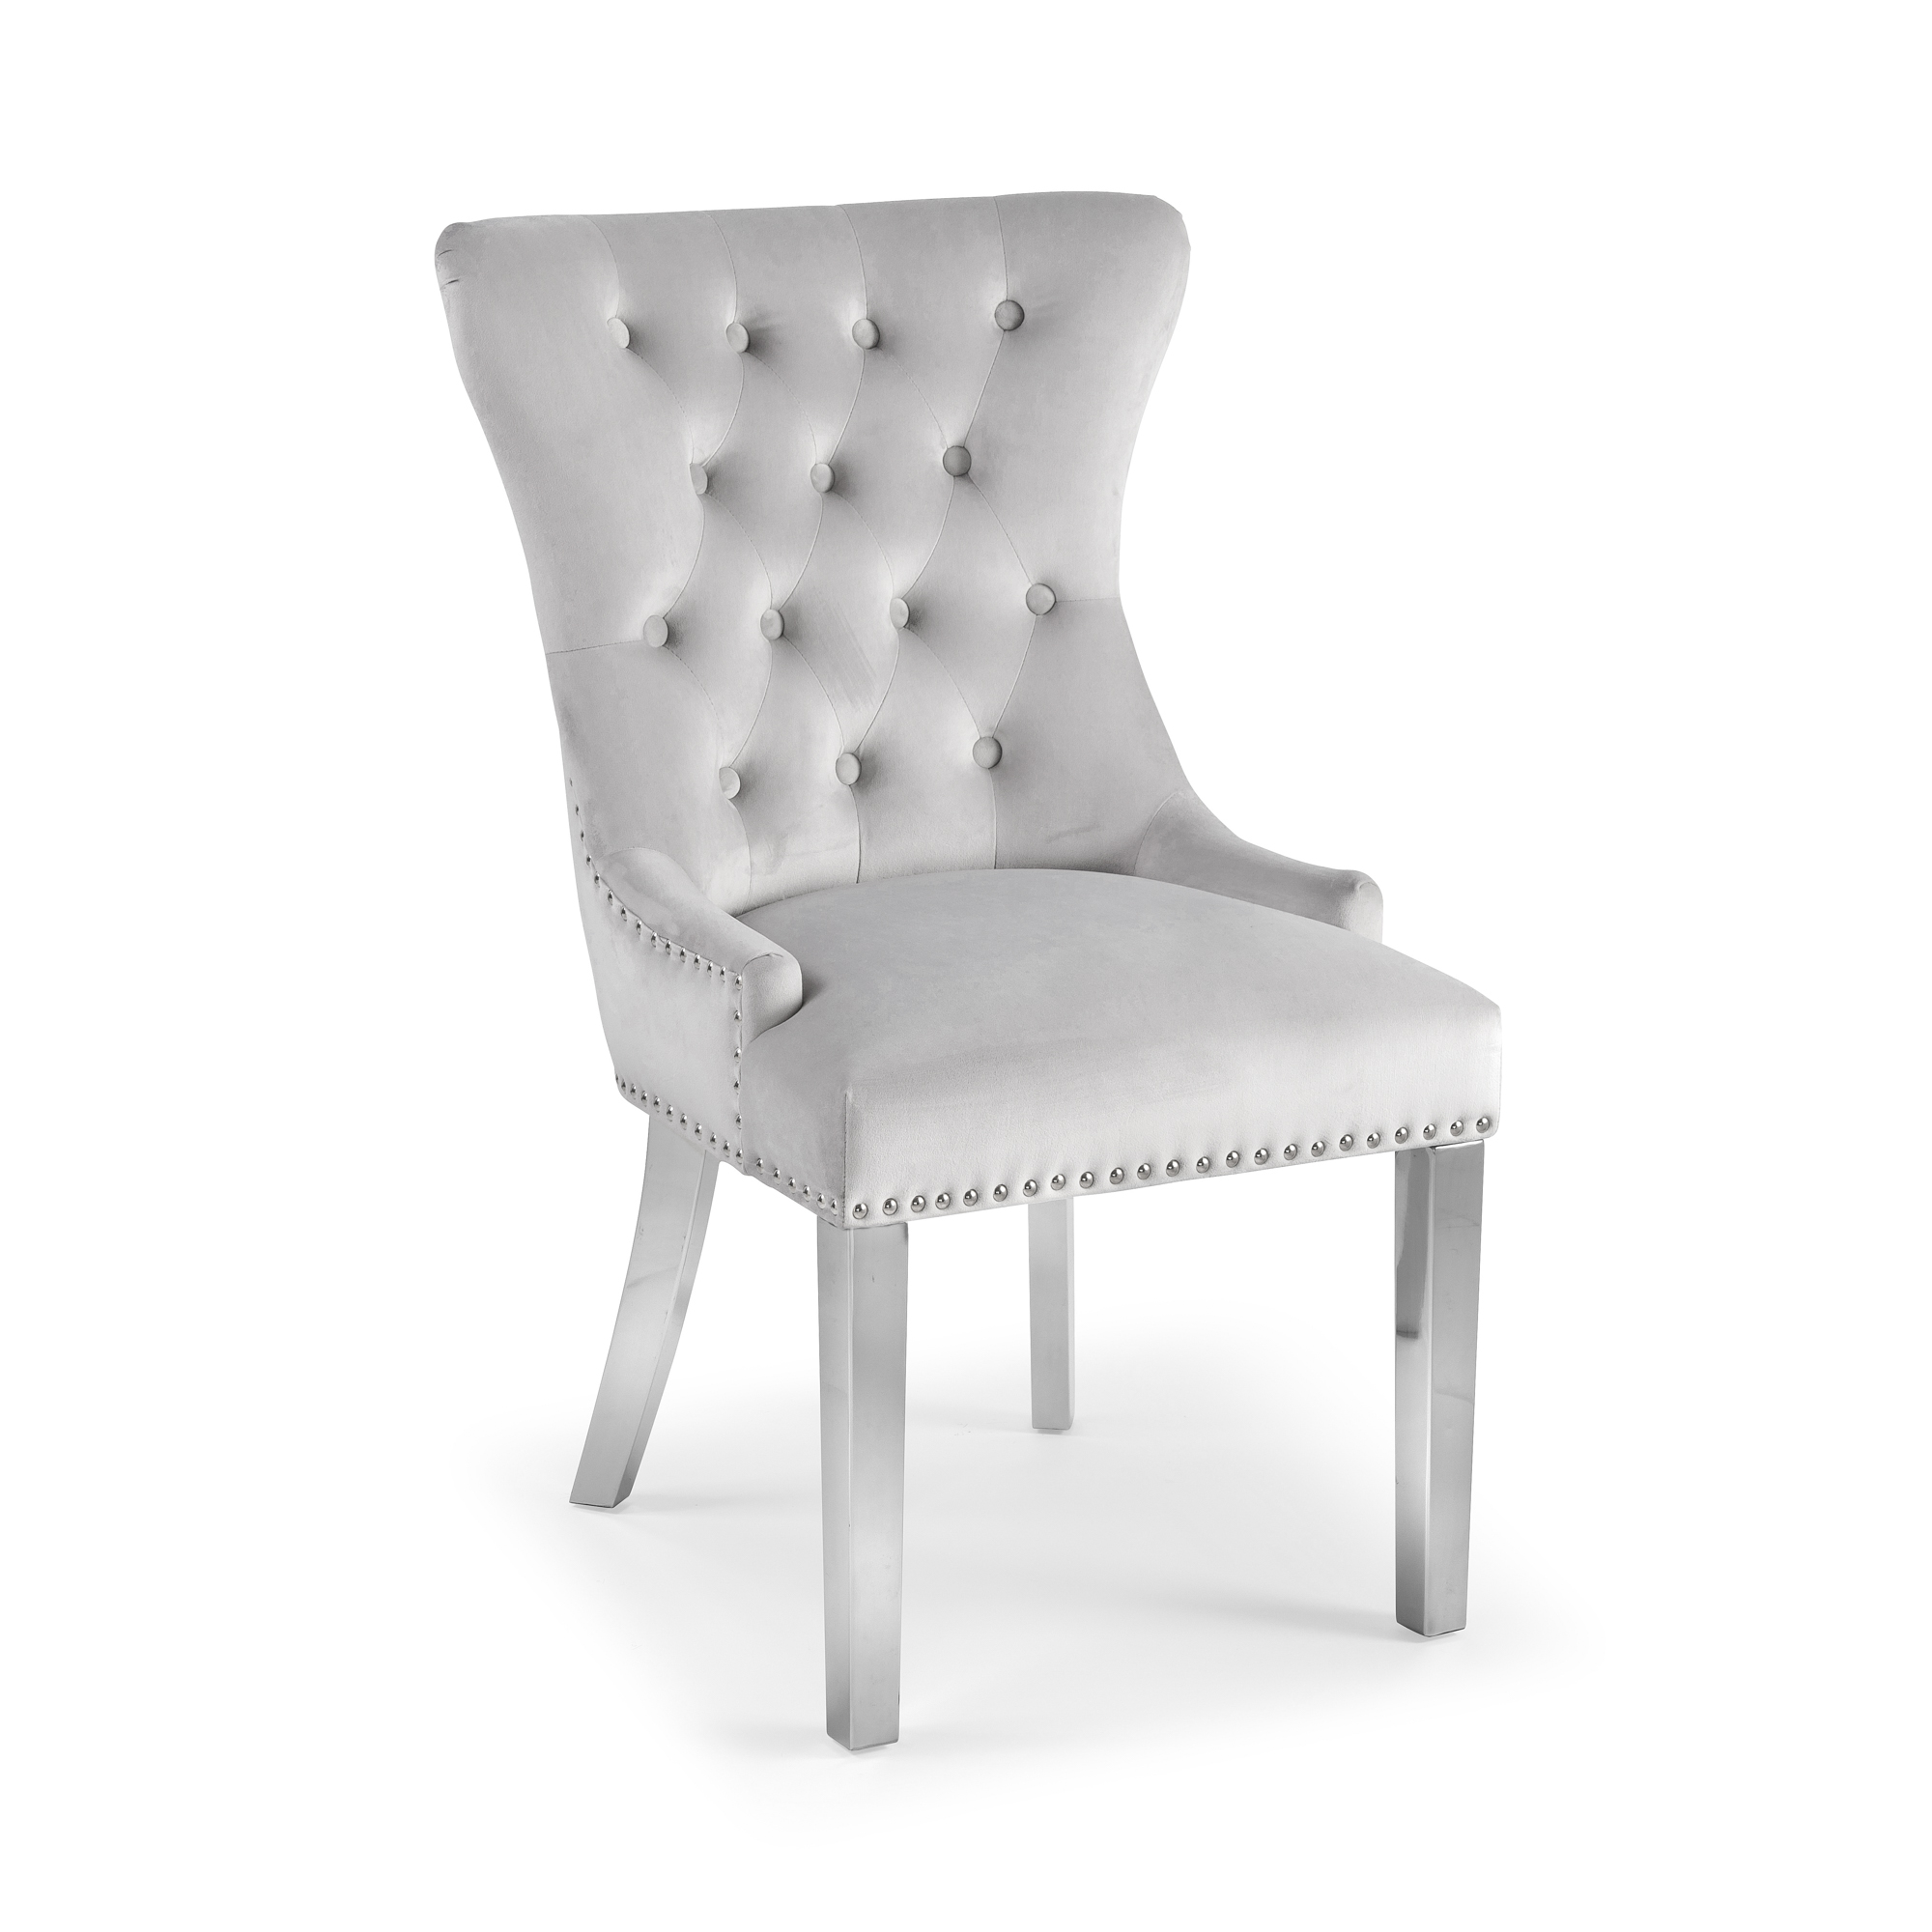 Dove Grey Brushed Velvet Dining Chair with Polished Steel Legs – Set of